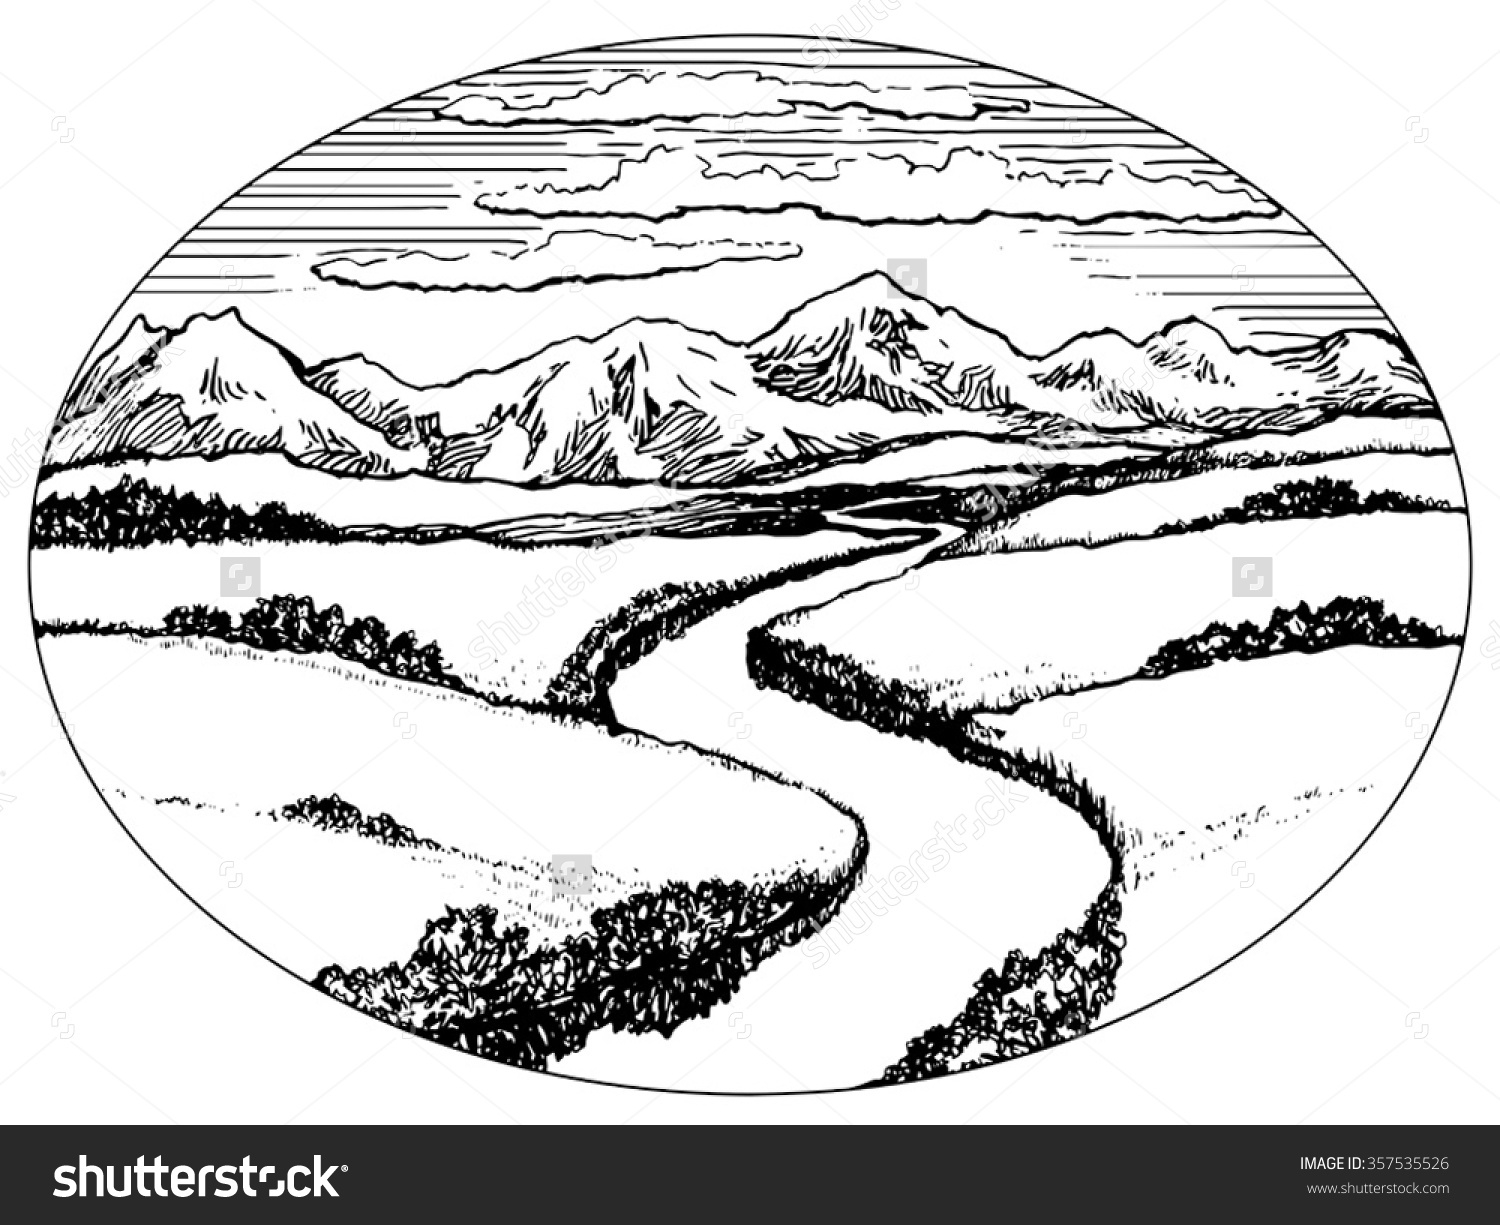 River clipart black and white